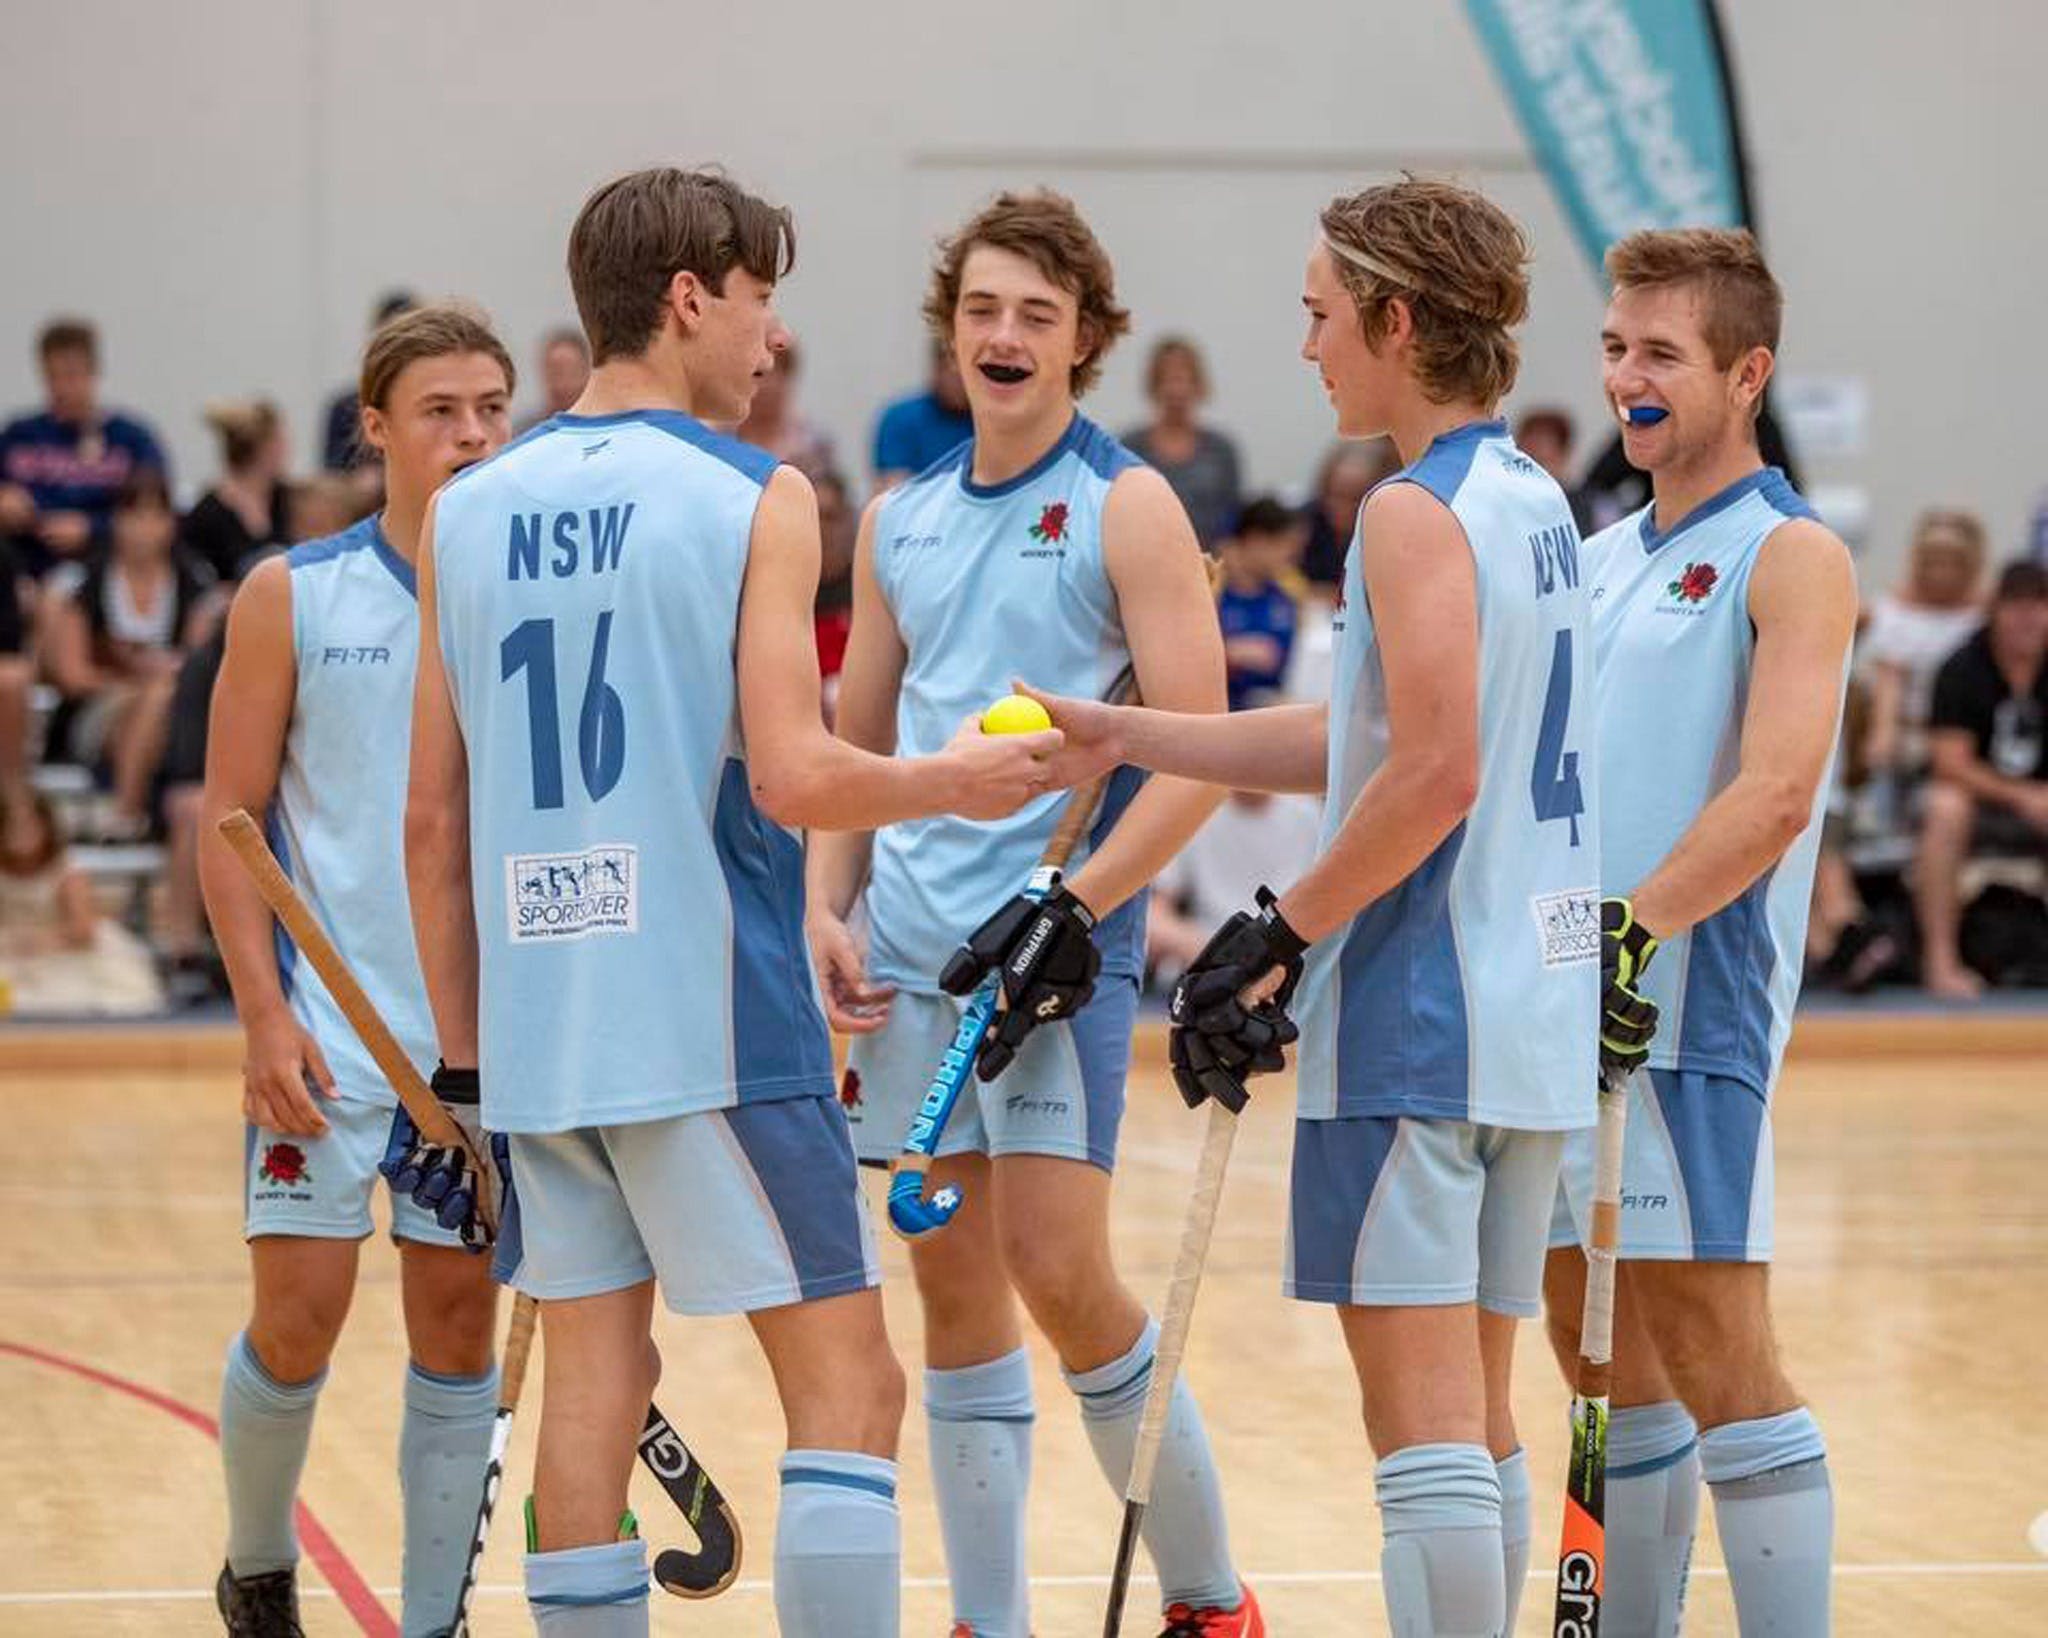 Hockey NSW Indoor State Championship  Open Men - Accommodation Bookings